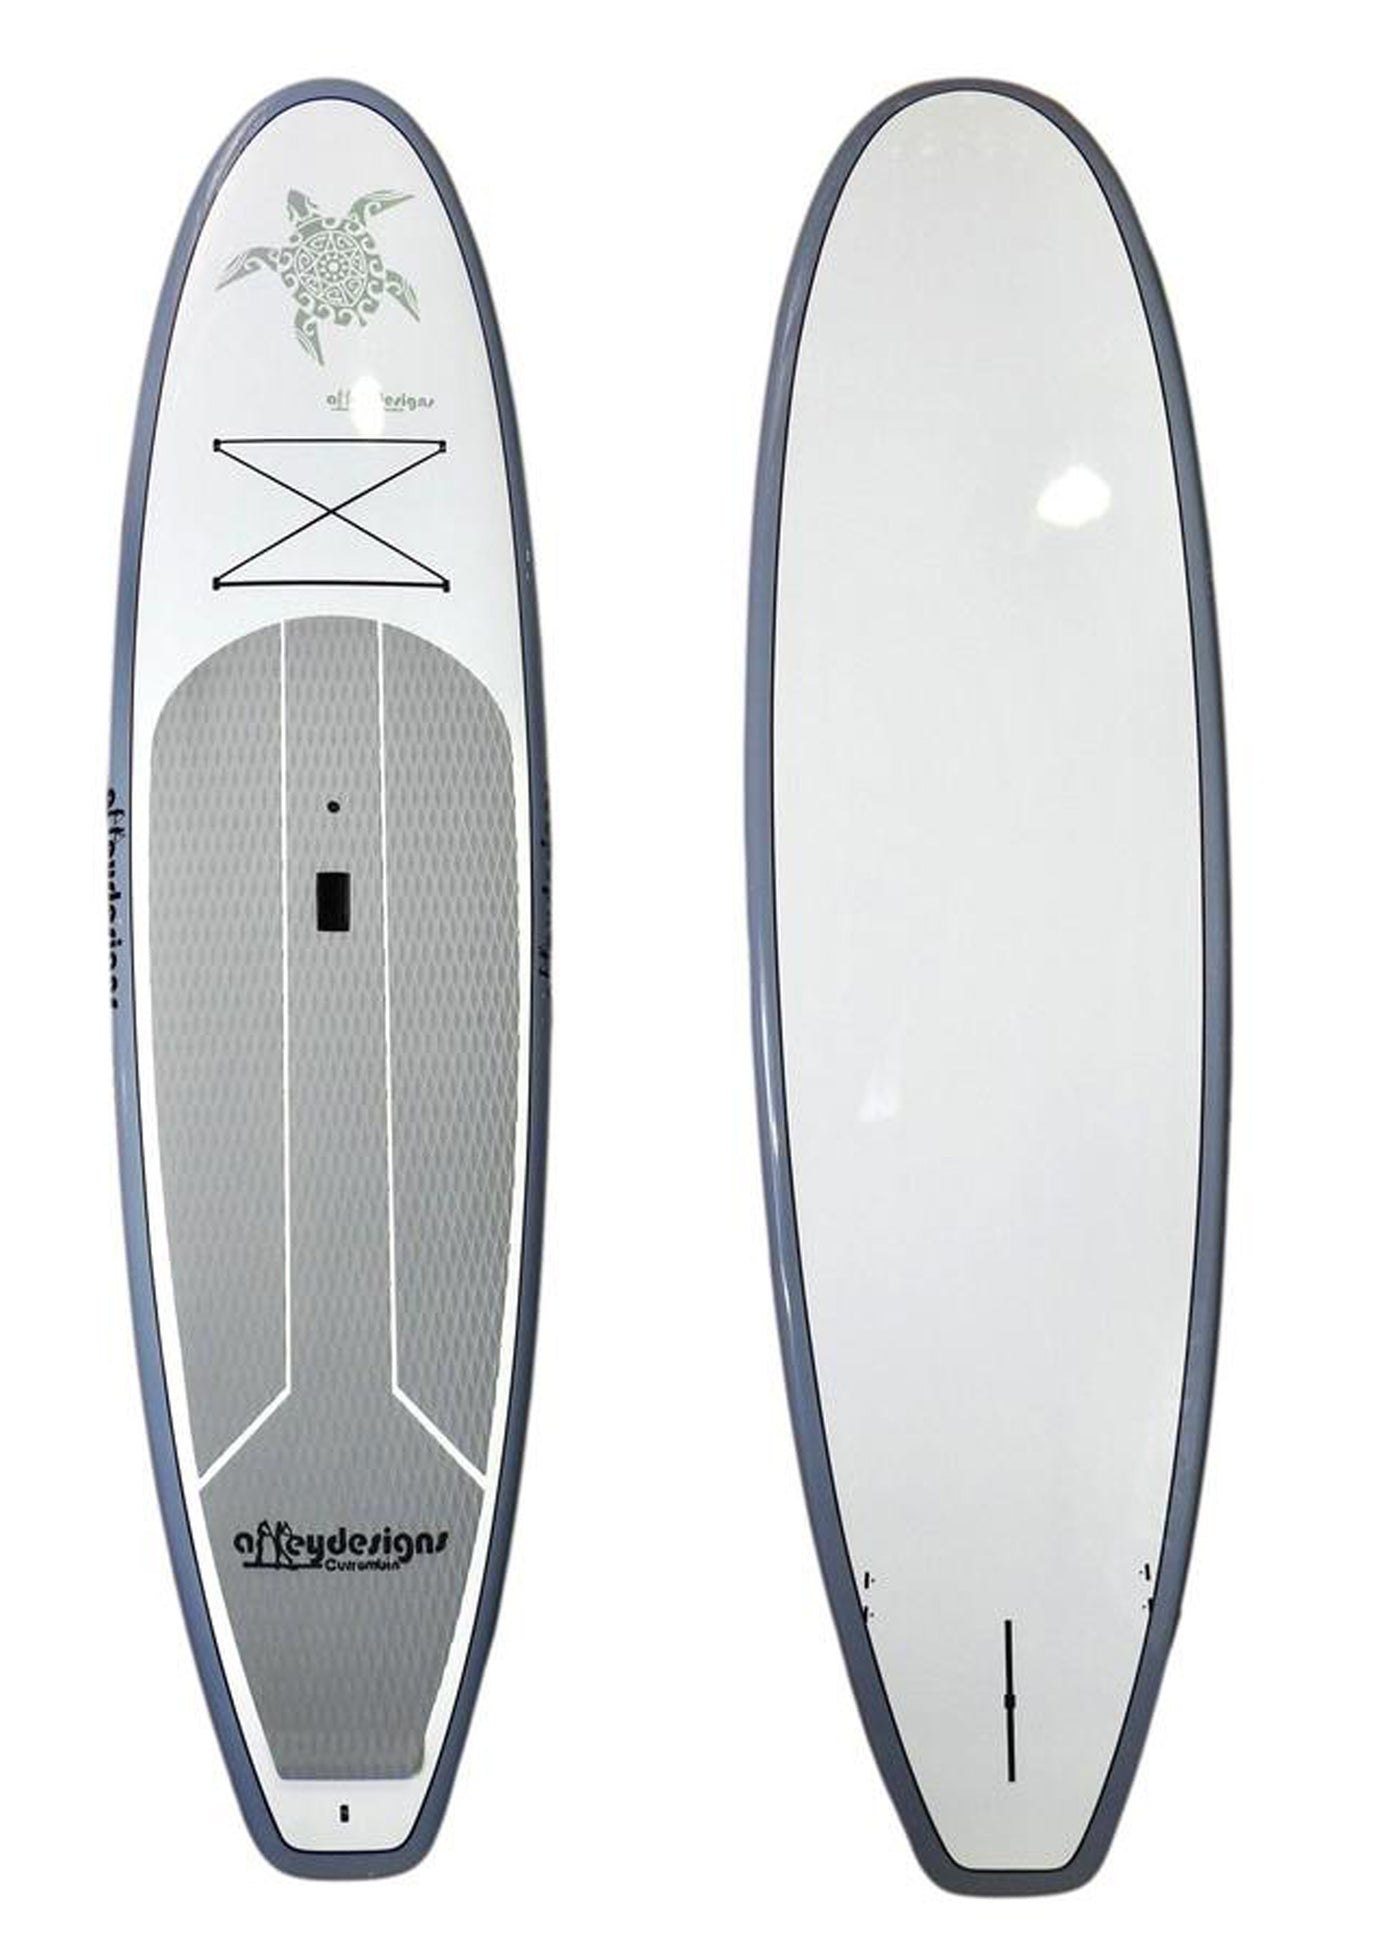 10’6” x 32” Thermo Mould Silver & White ,Turtle  SUP - Alleydesigns  Pty Ltd                                             ABN: 44165571264